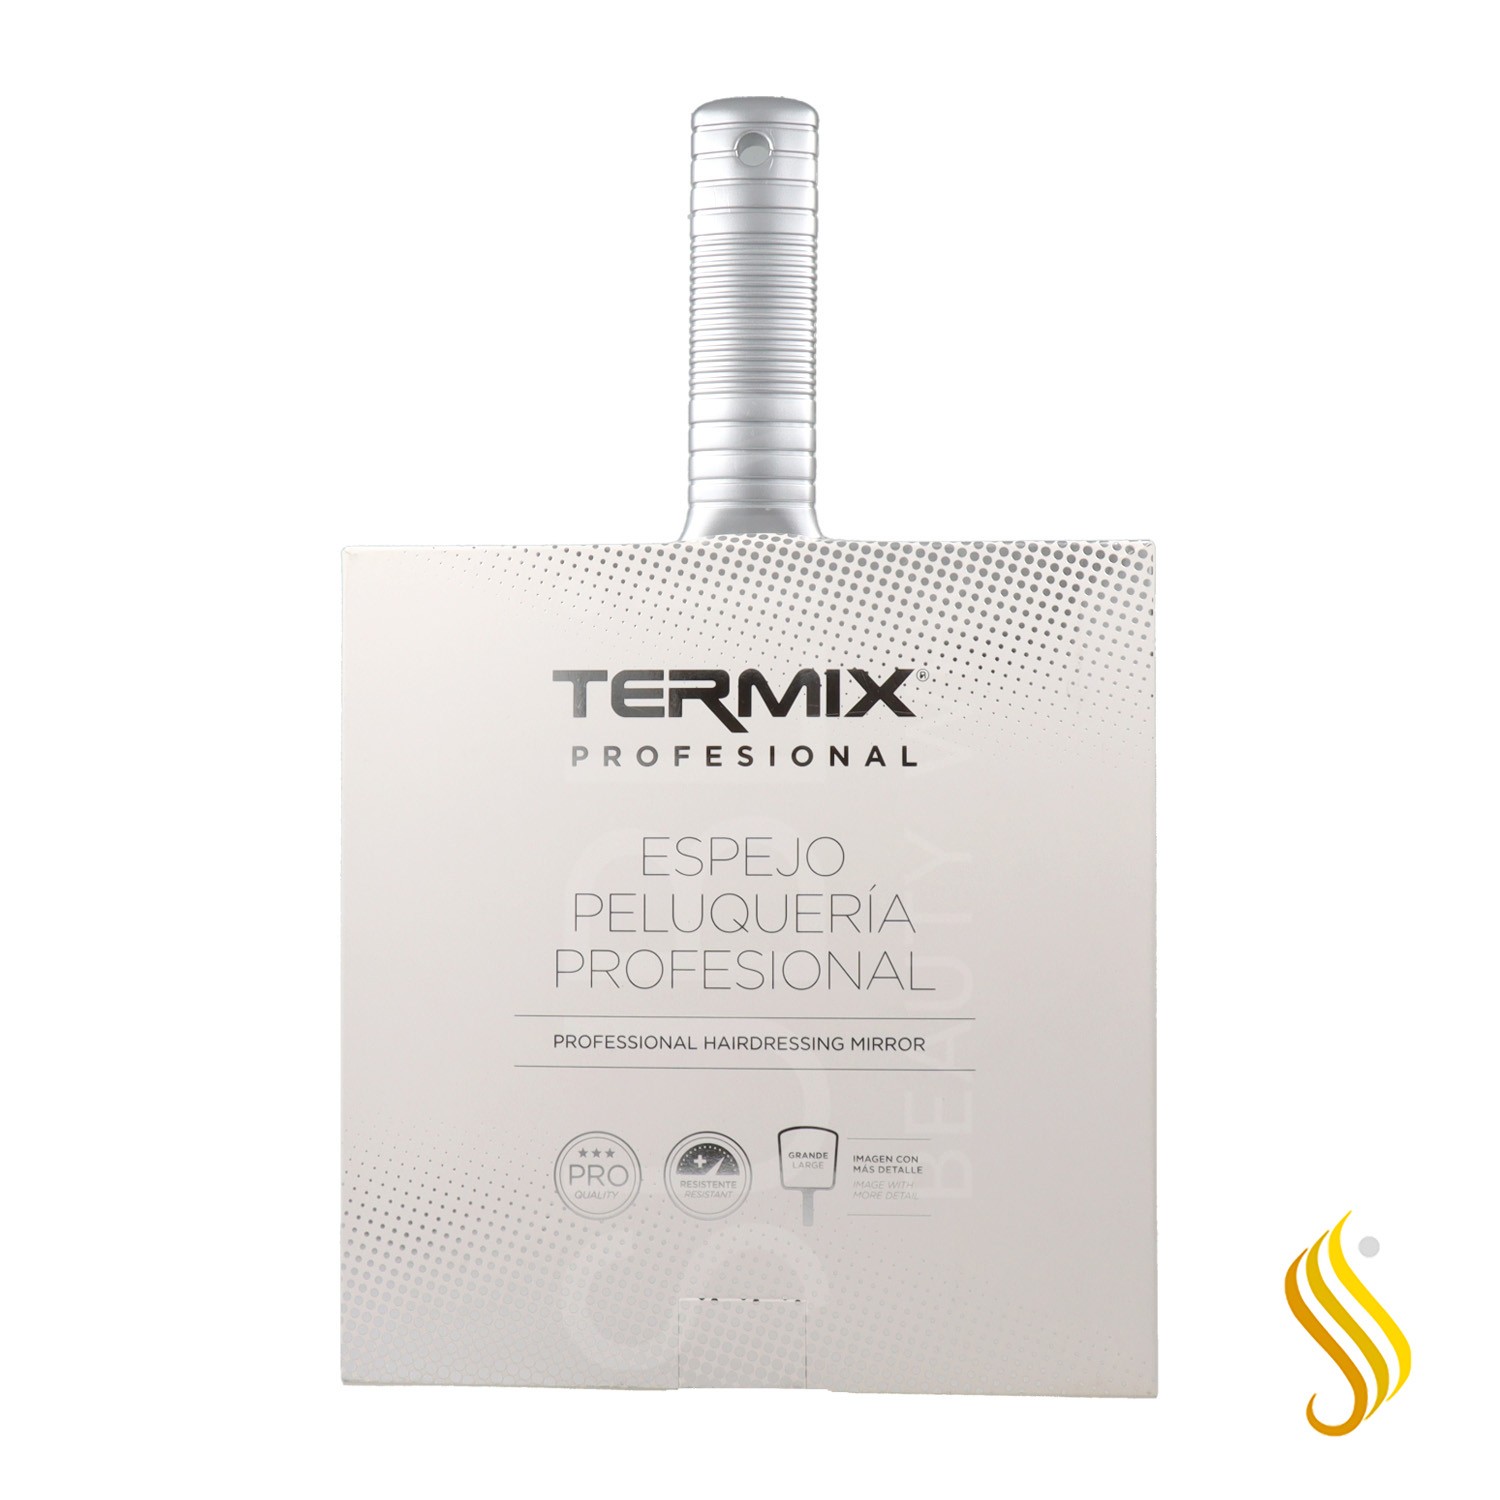 Termix Professional Hairdressing Mirror Silver Color